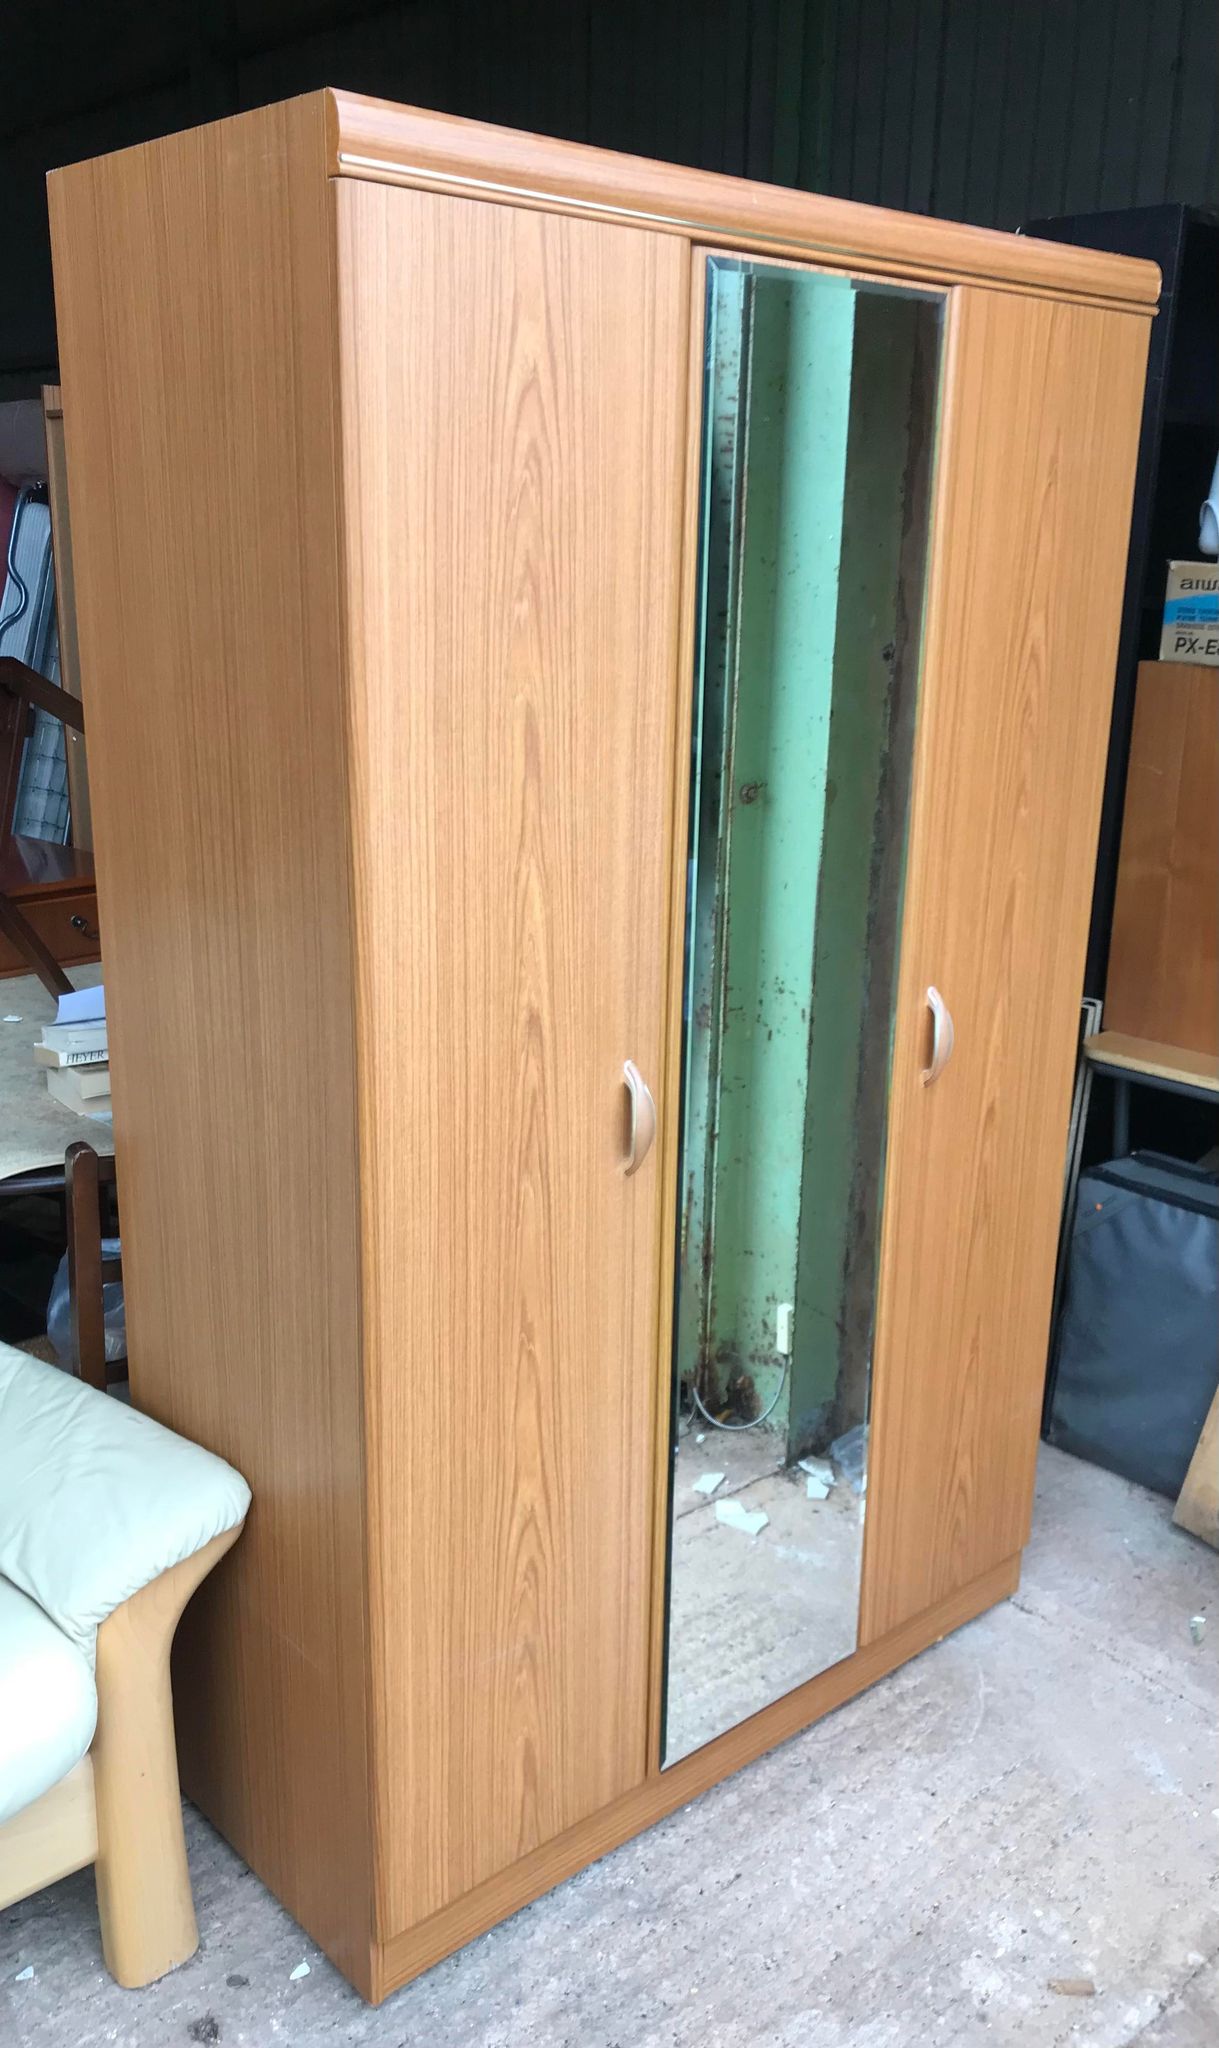 Large two-door wardrobe with fixed mirror in the middle. On wheels so easy to move around the room. 
Dimensions: 114cm wide, 52cm deep, 185cm tall.
Due to size this cannot be delivered to upstairs rooms. Two matching wardrobes available, plus a dressing table and small chest of drawers. 